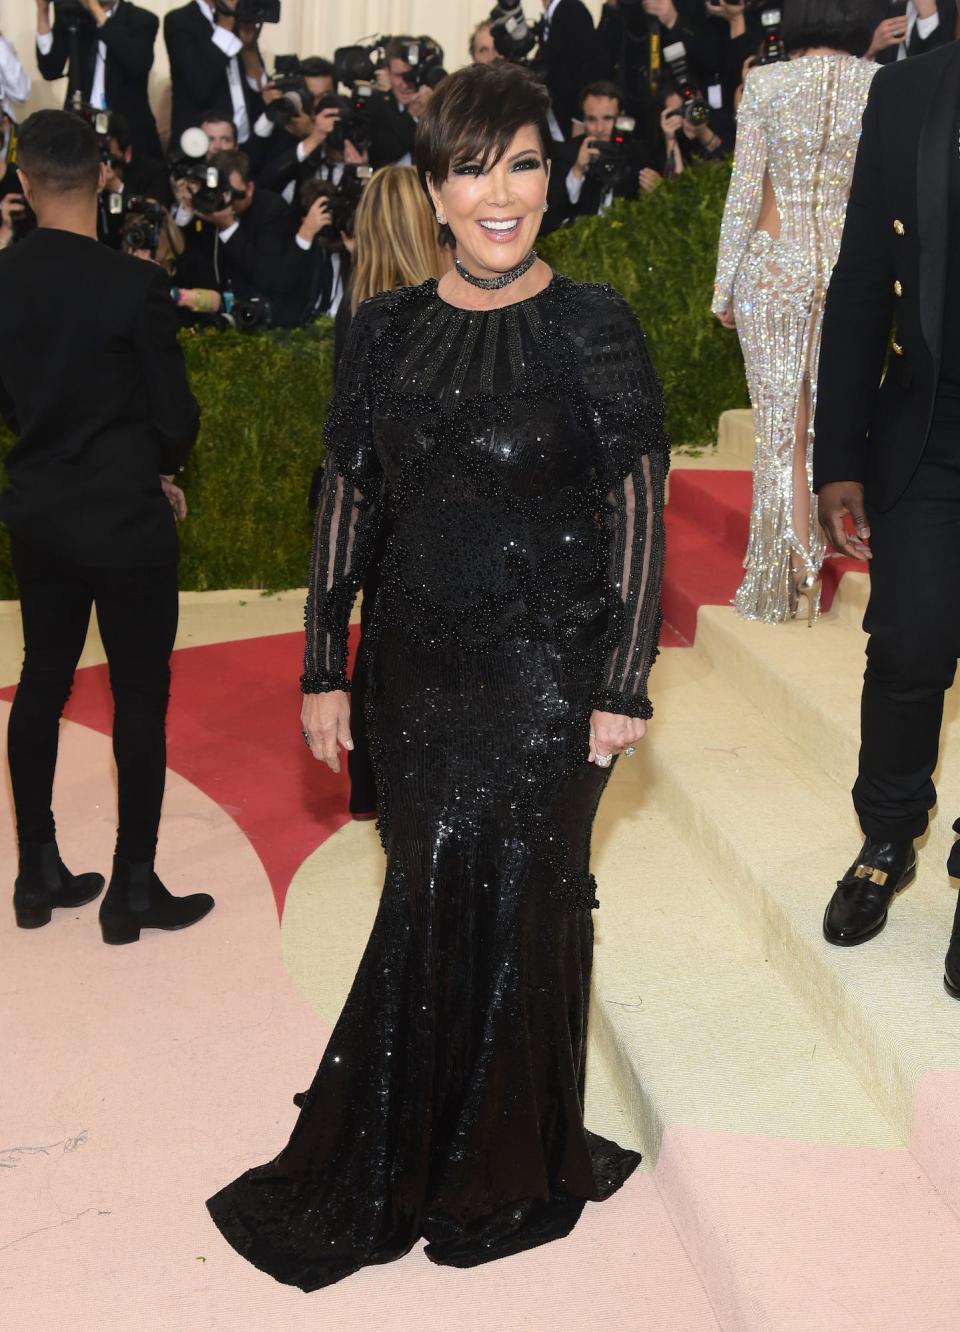 Kris Jenner poses for photos on the 2016 Met Gala red carpet wearing a shimmery black gown.